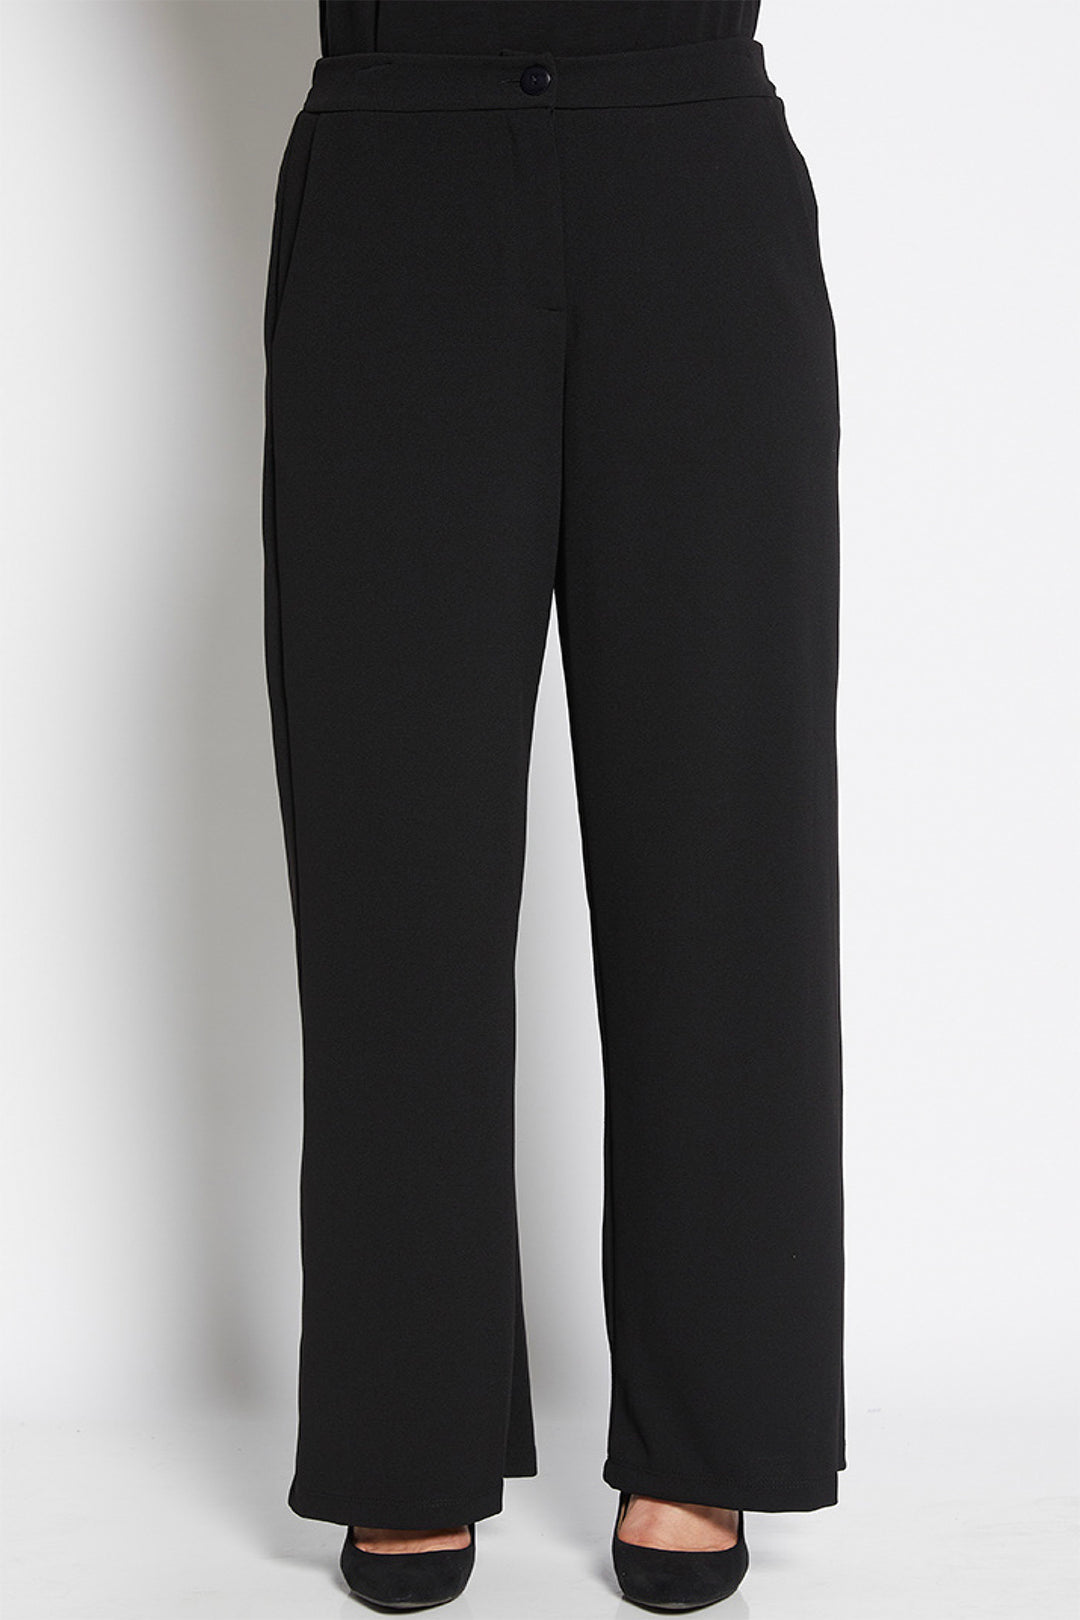 Estelle wide leg pant in black by Philosophy Clothing Australia, button & zip closure, elastic back waistband, side pockets. Sold & shipped by Pizazz Boutique.